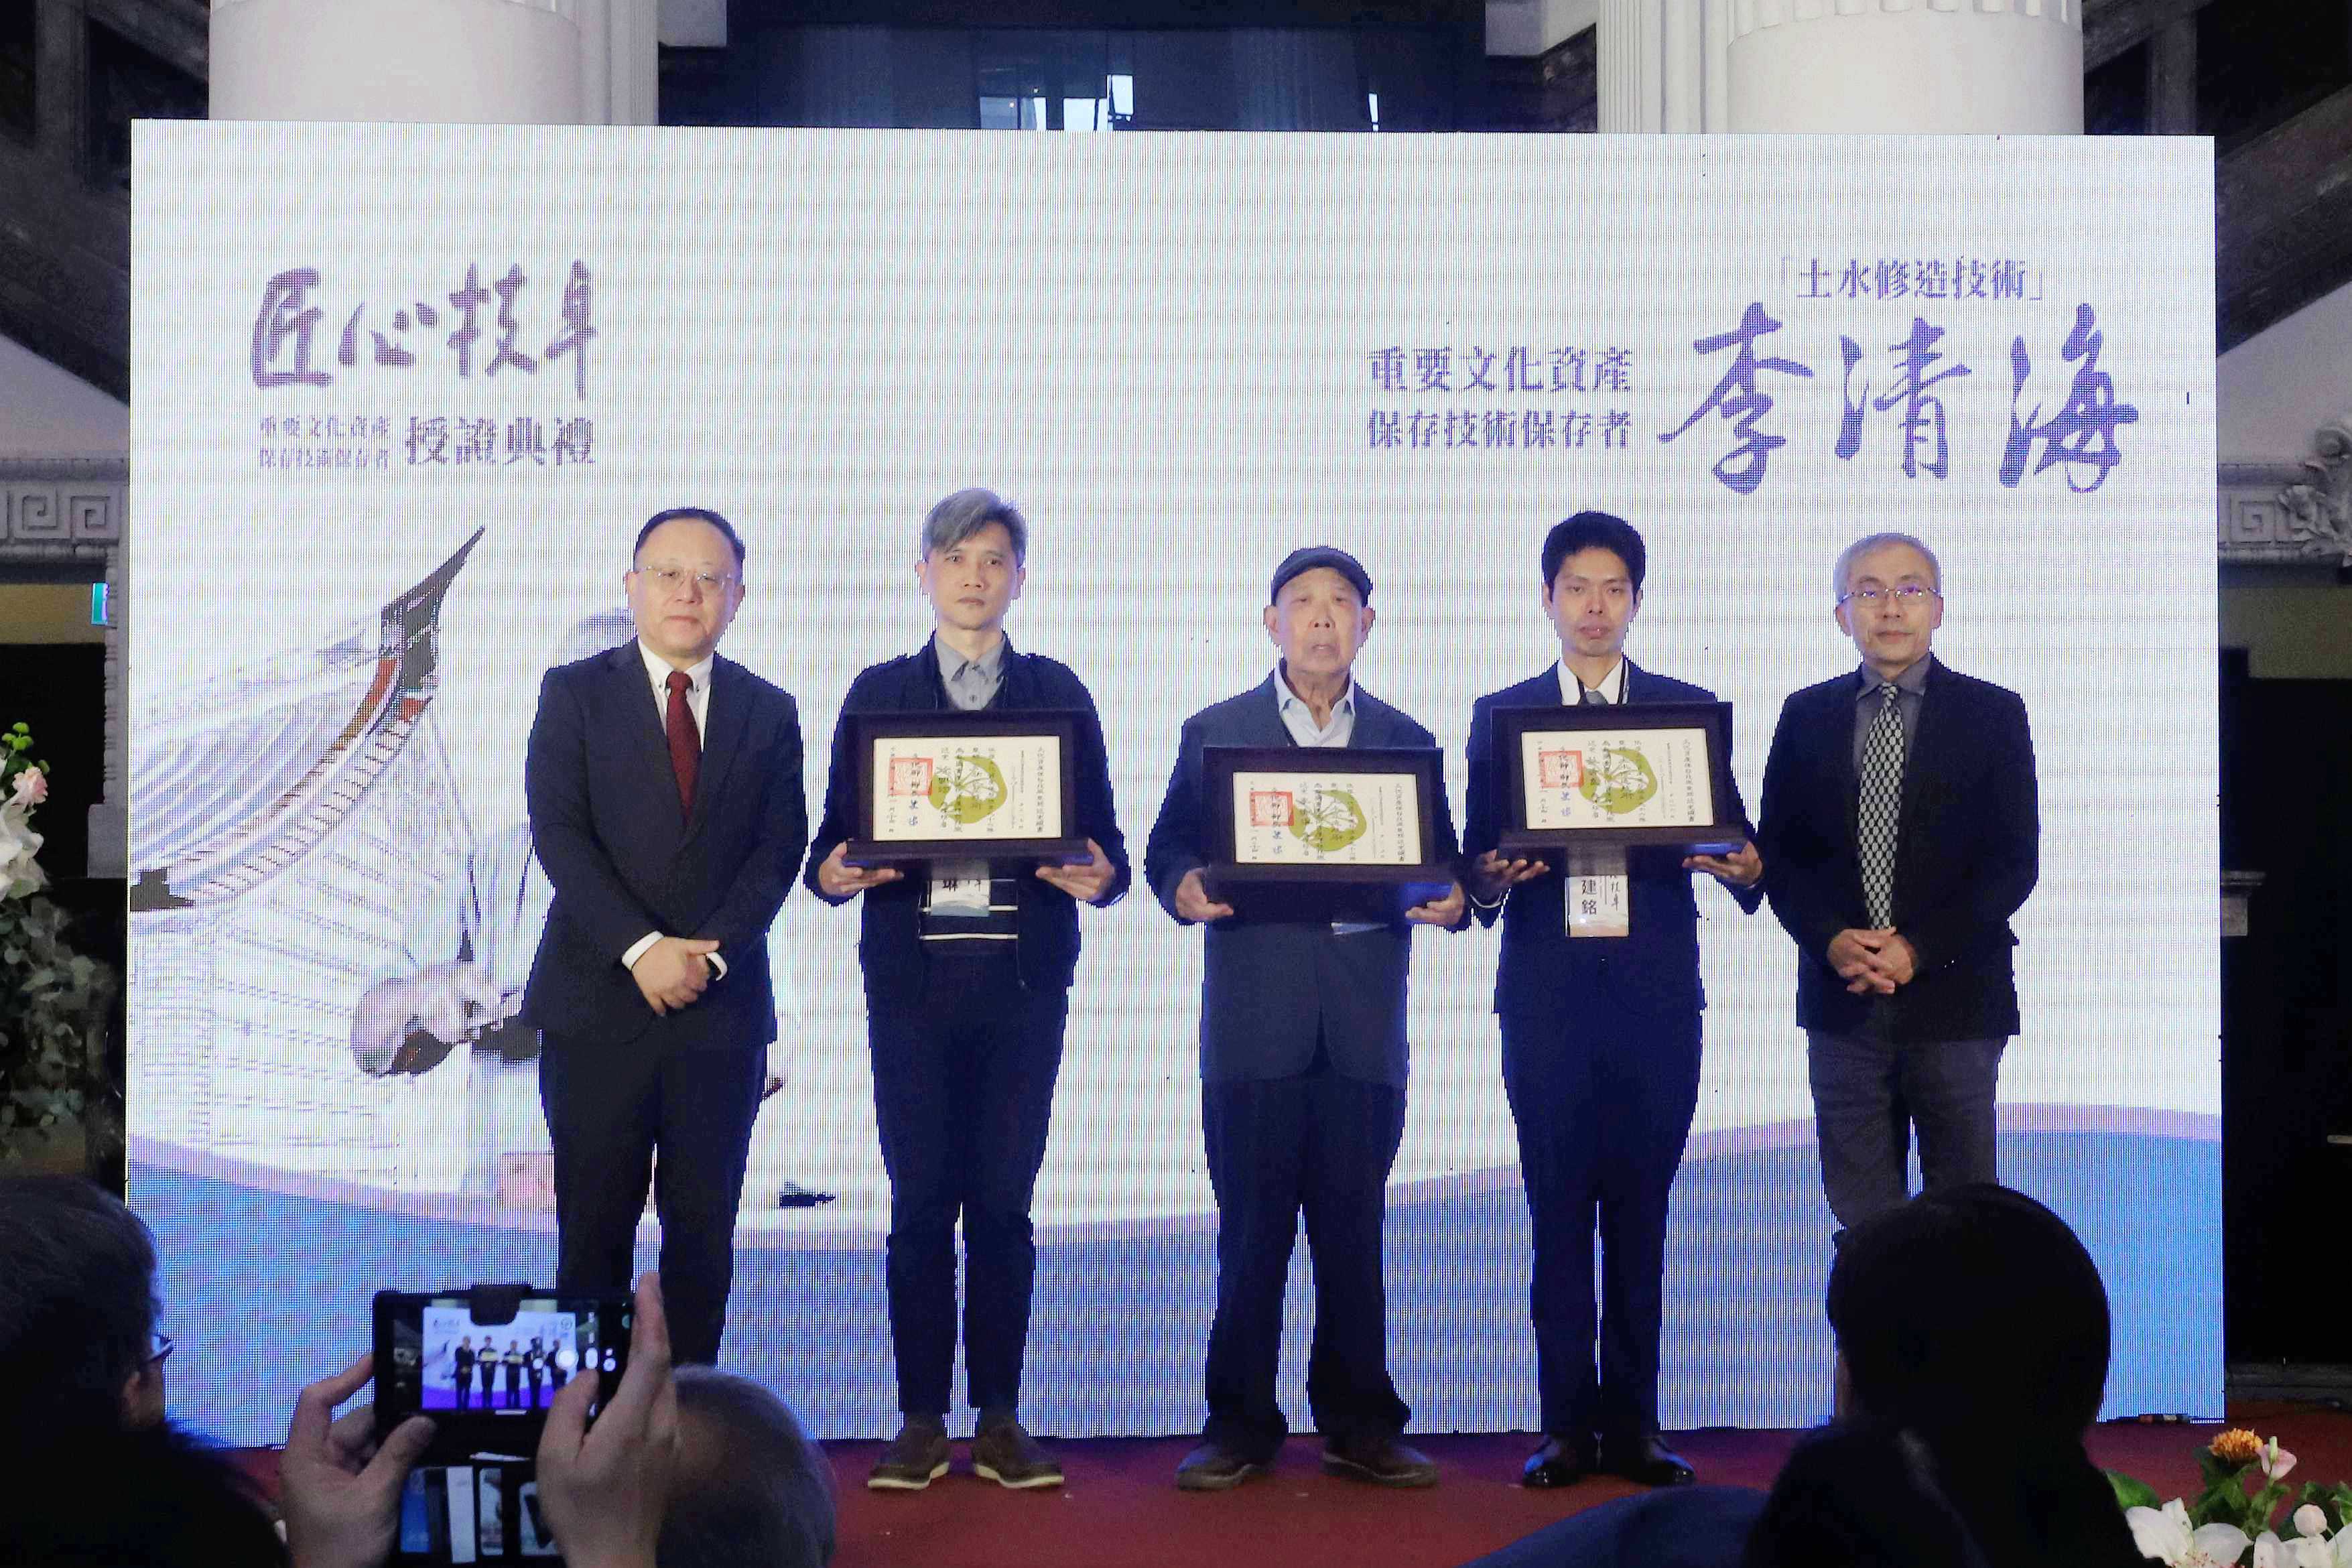 Culture Minister Shih Che, Hsu Ming-he's son Hsu Chao-lin, Lee Ching-hai, Su Ching-liang's grand son Su Chien-ming, and BOCH Director General Chen Chi-ming (from left to right)